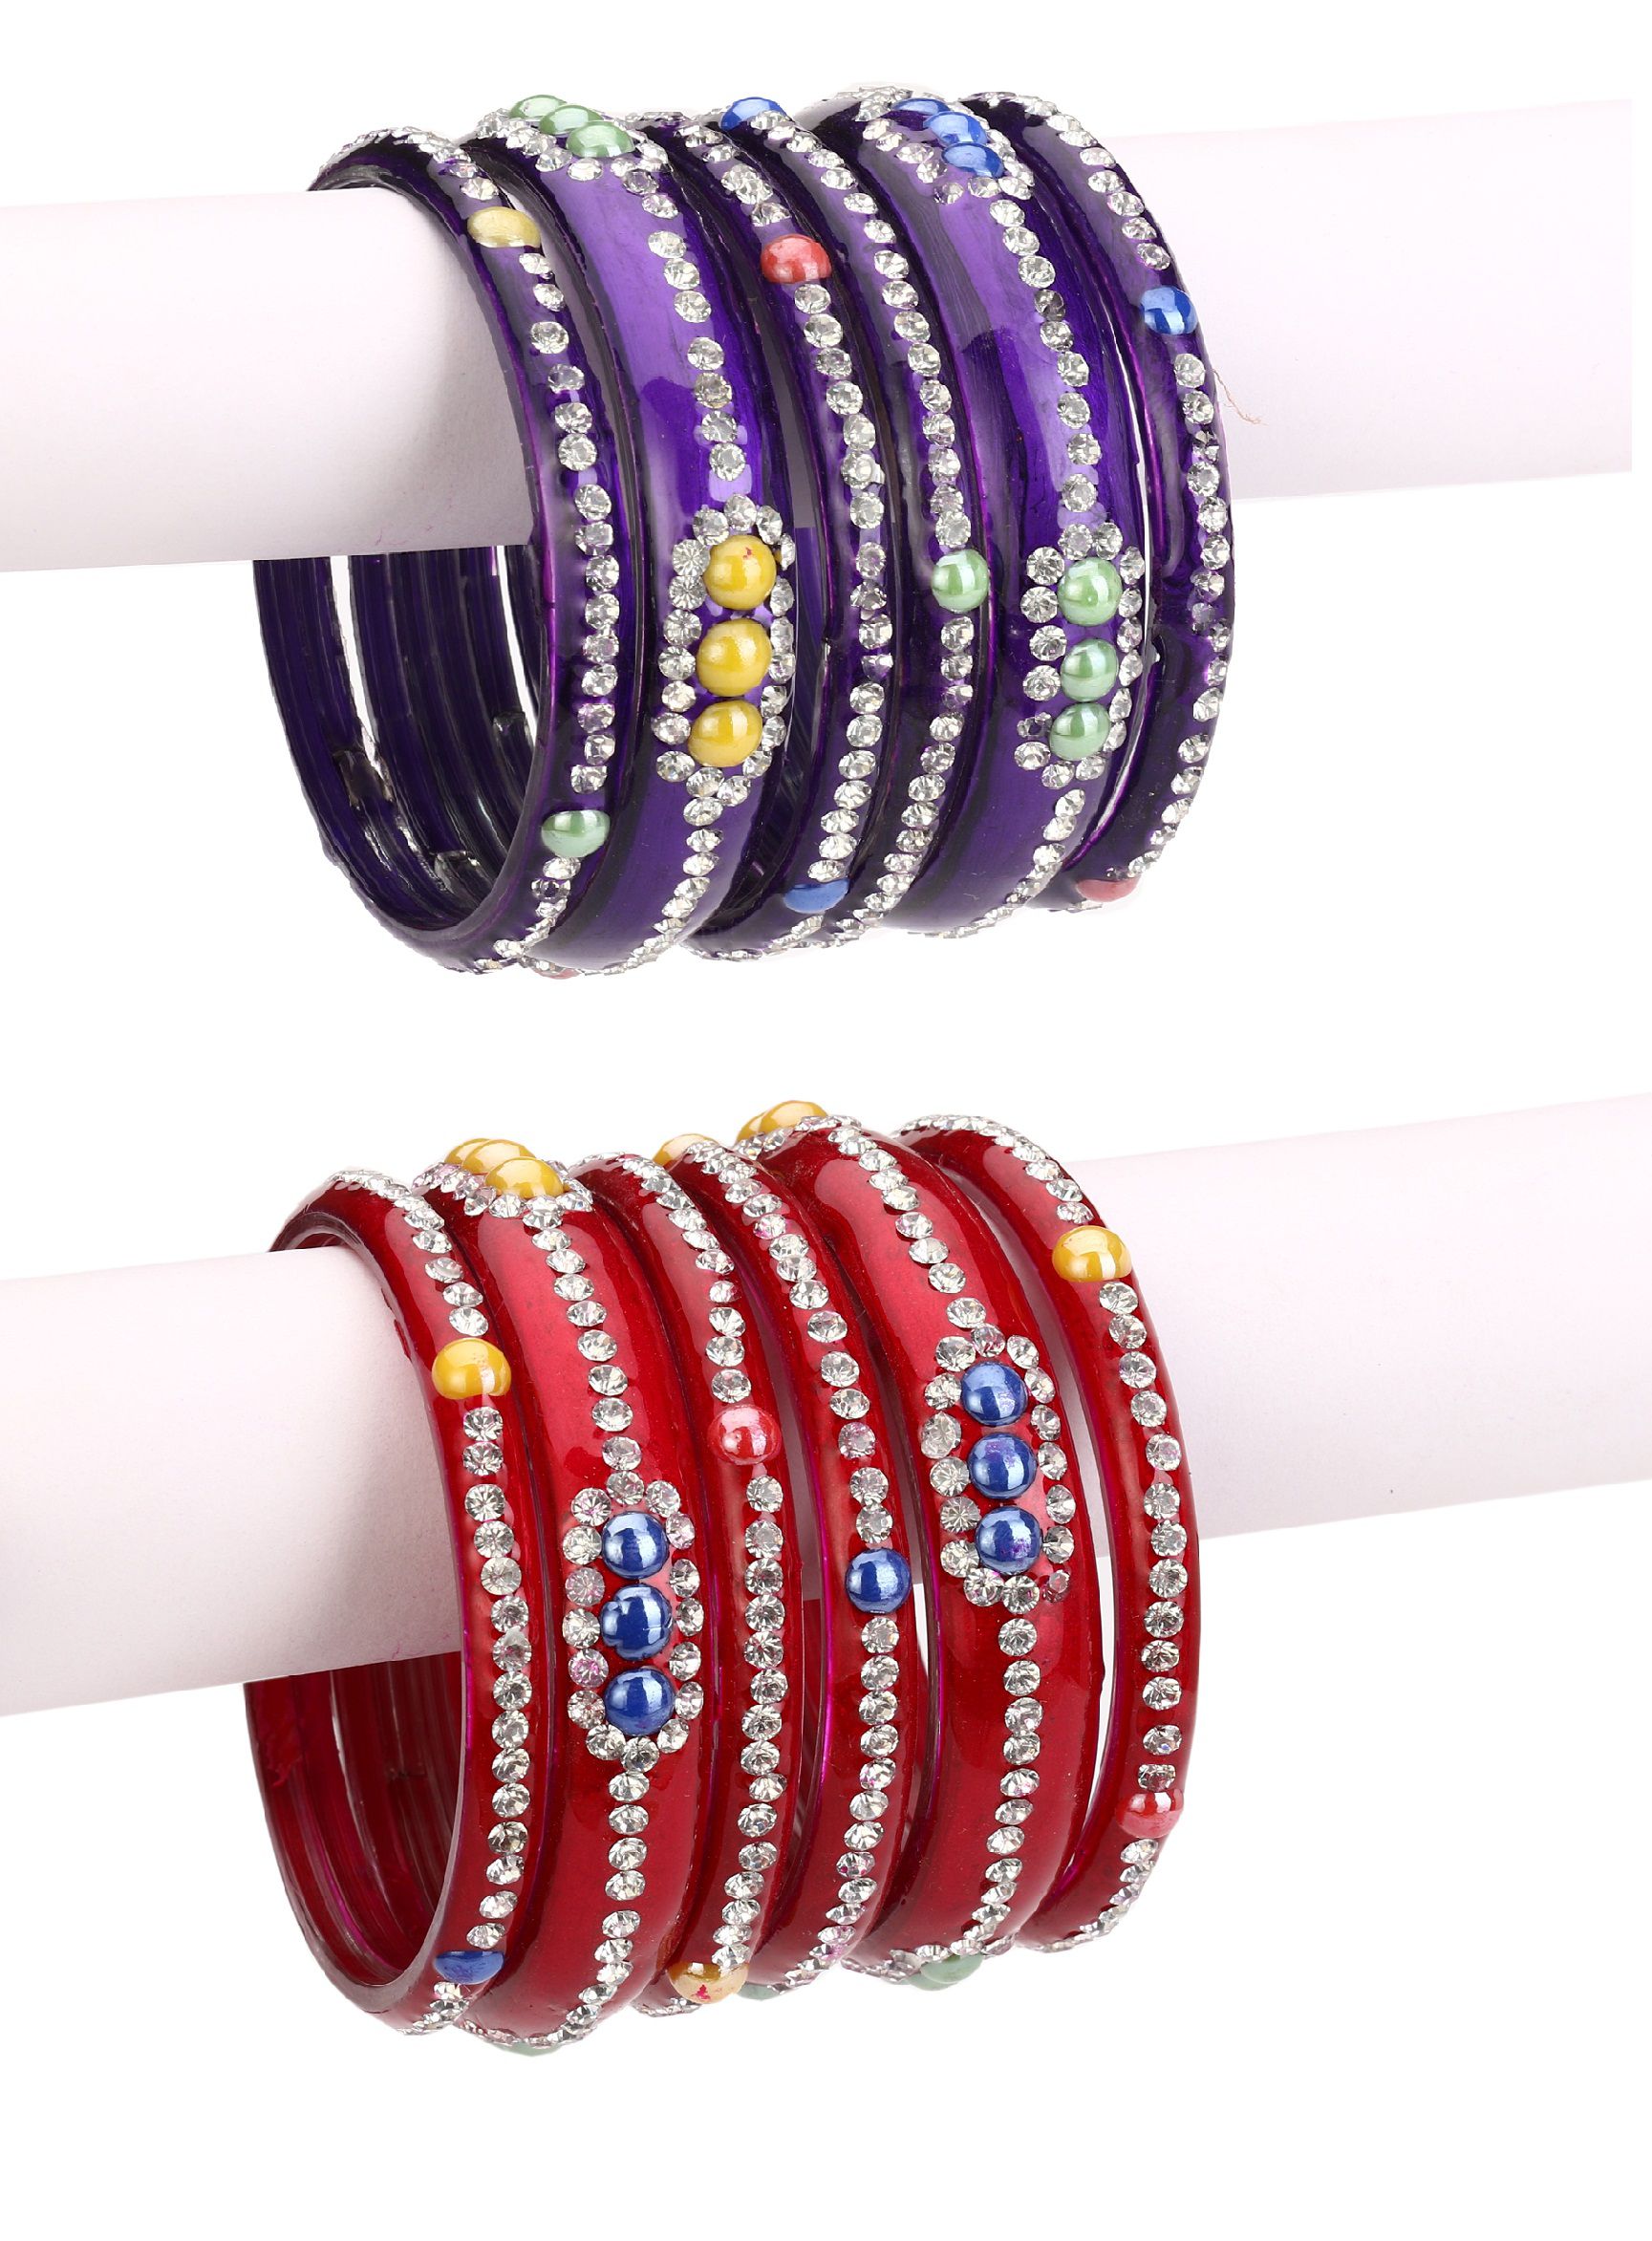     			AFAST  Combo Party & Festivle Designer Ornamented With Colorful Beads And Figures Fancy Matching Glass Bangles & Kada Set Of Six Each With Safety Box